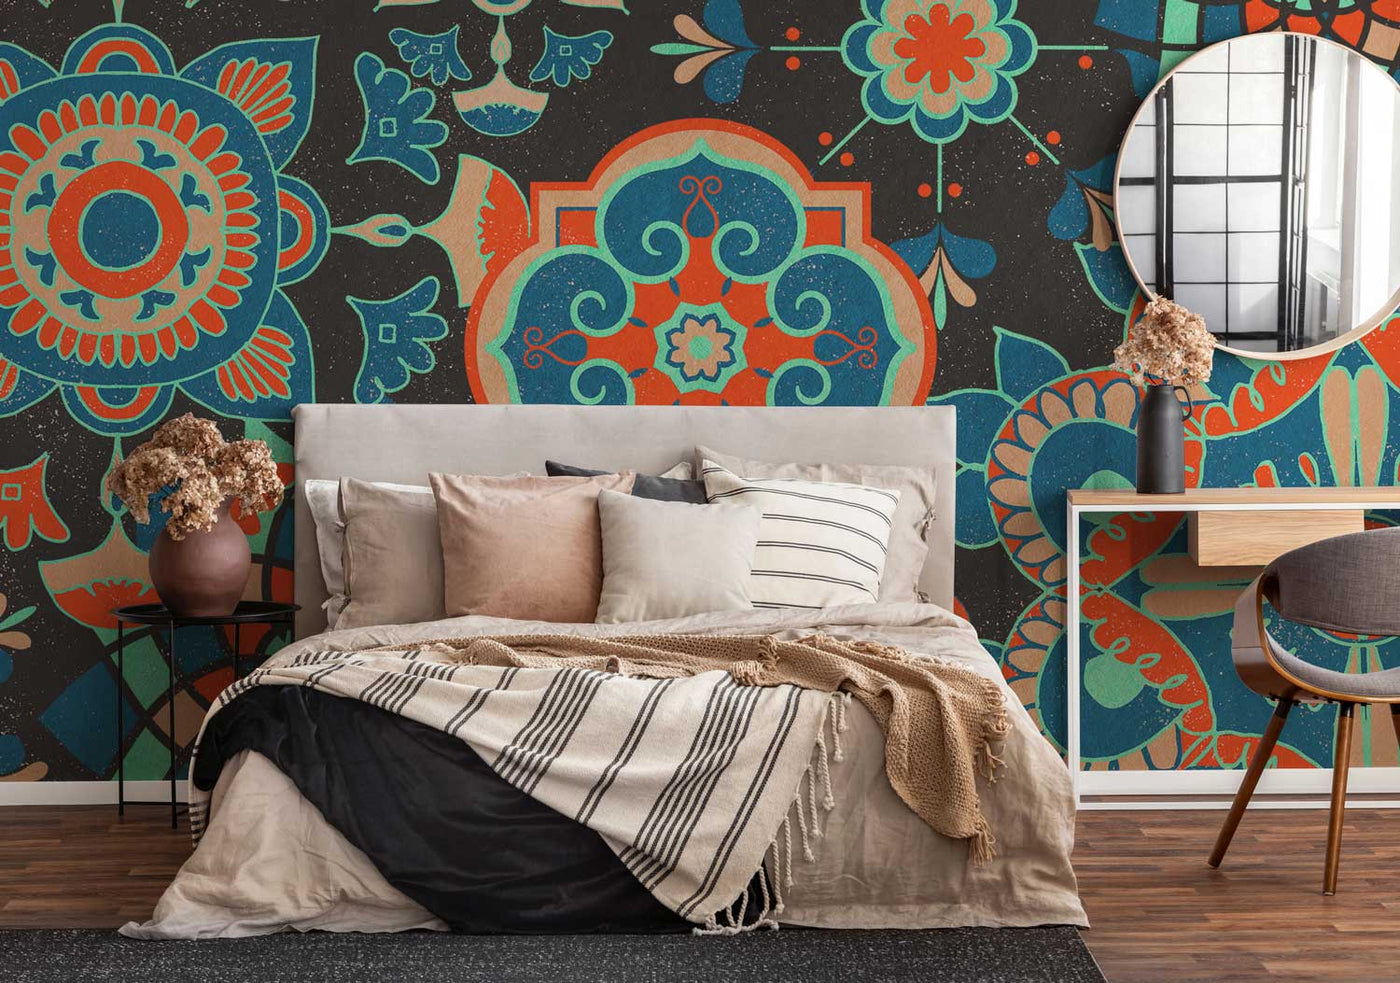 Vintage Ethnic Floral Wall Mural-Wall Mural-Eazywallz